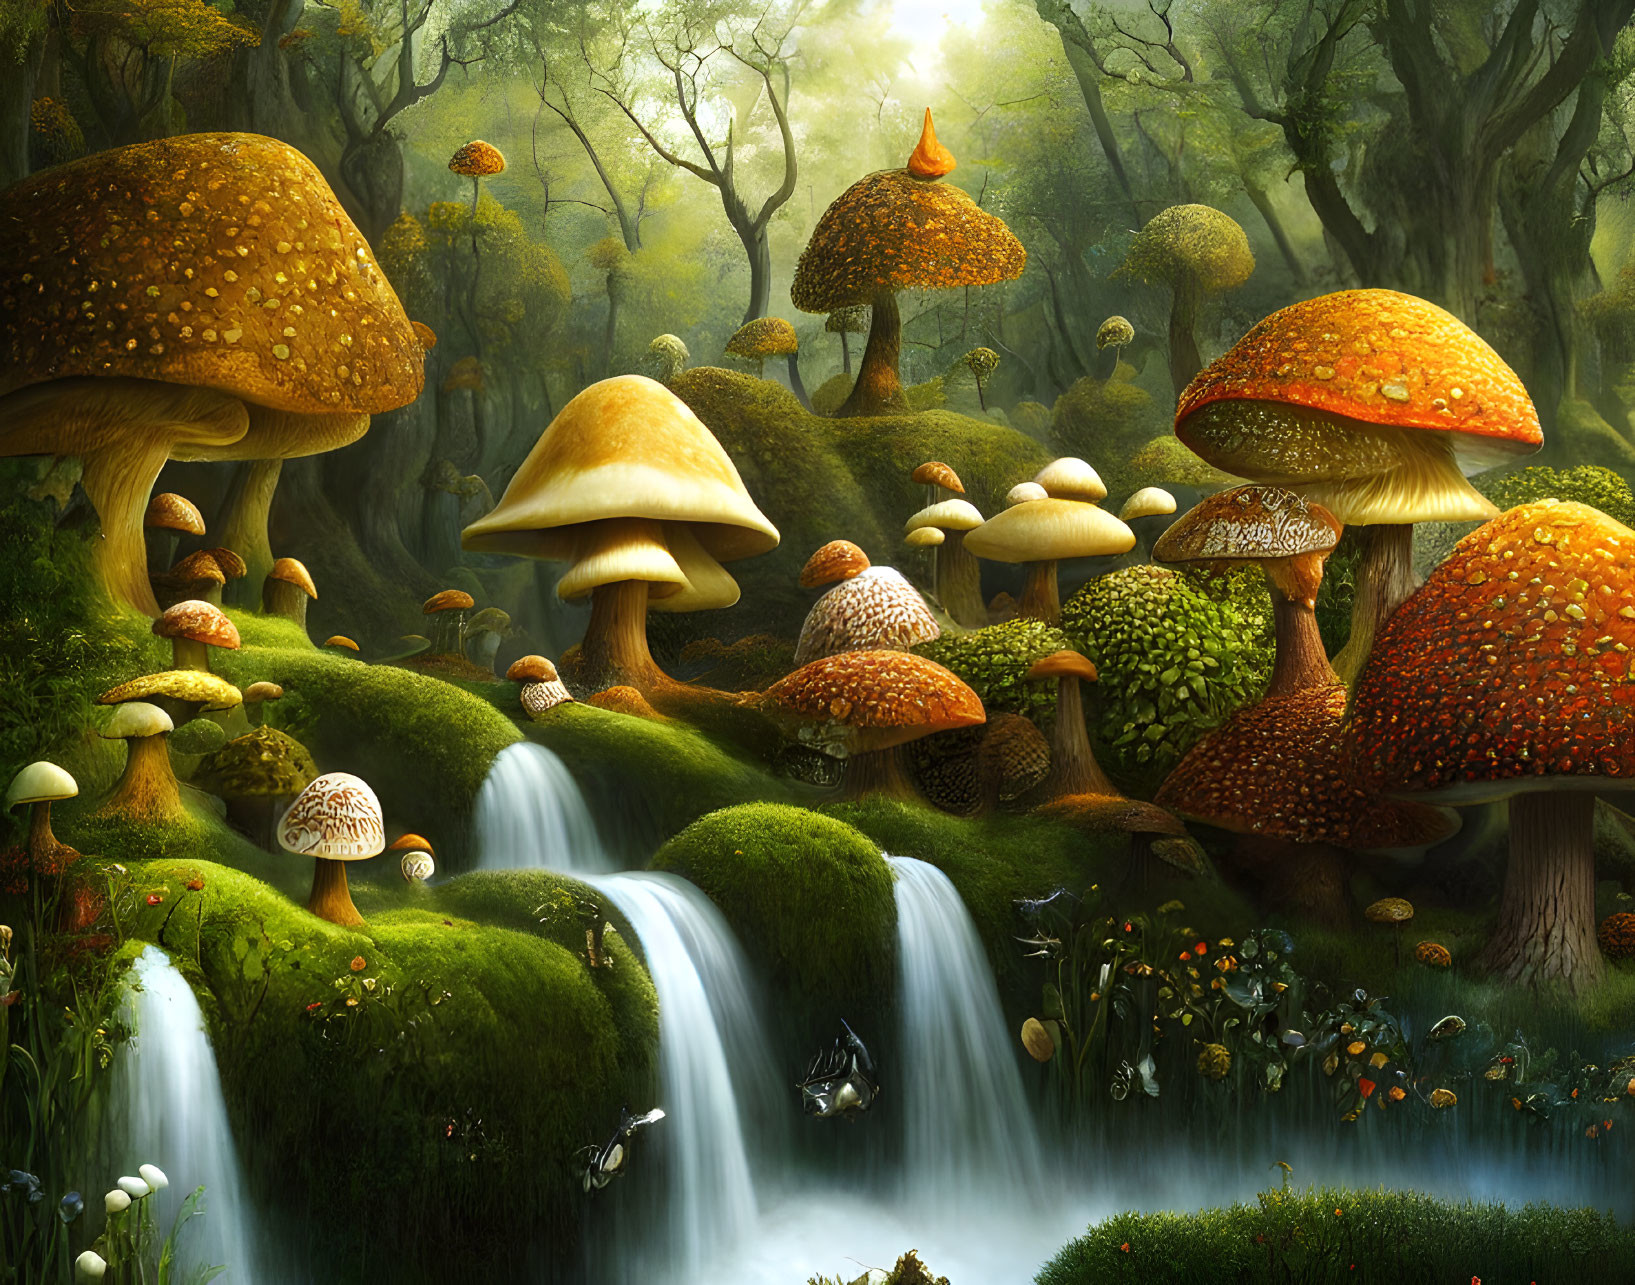 Land of the Giant Mushrooms